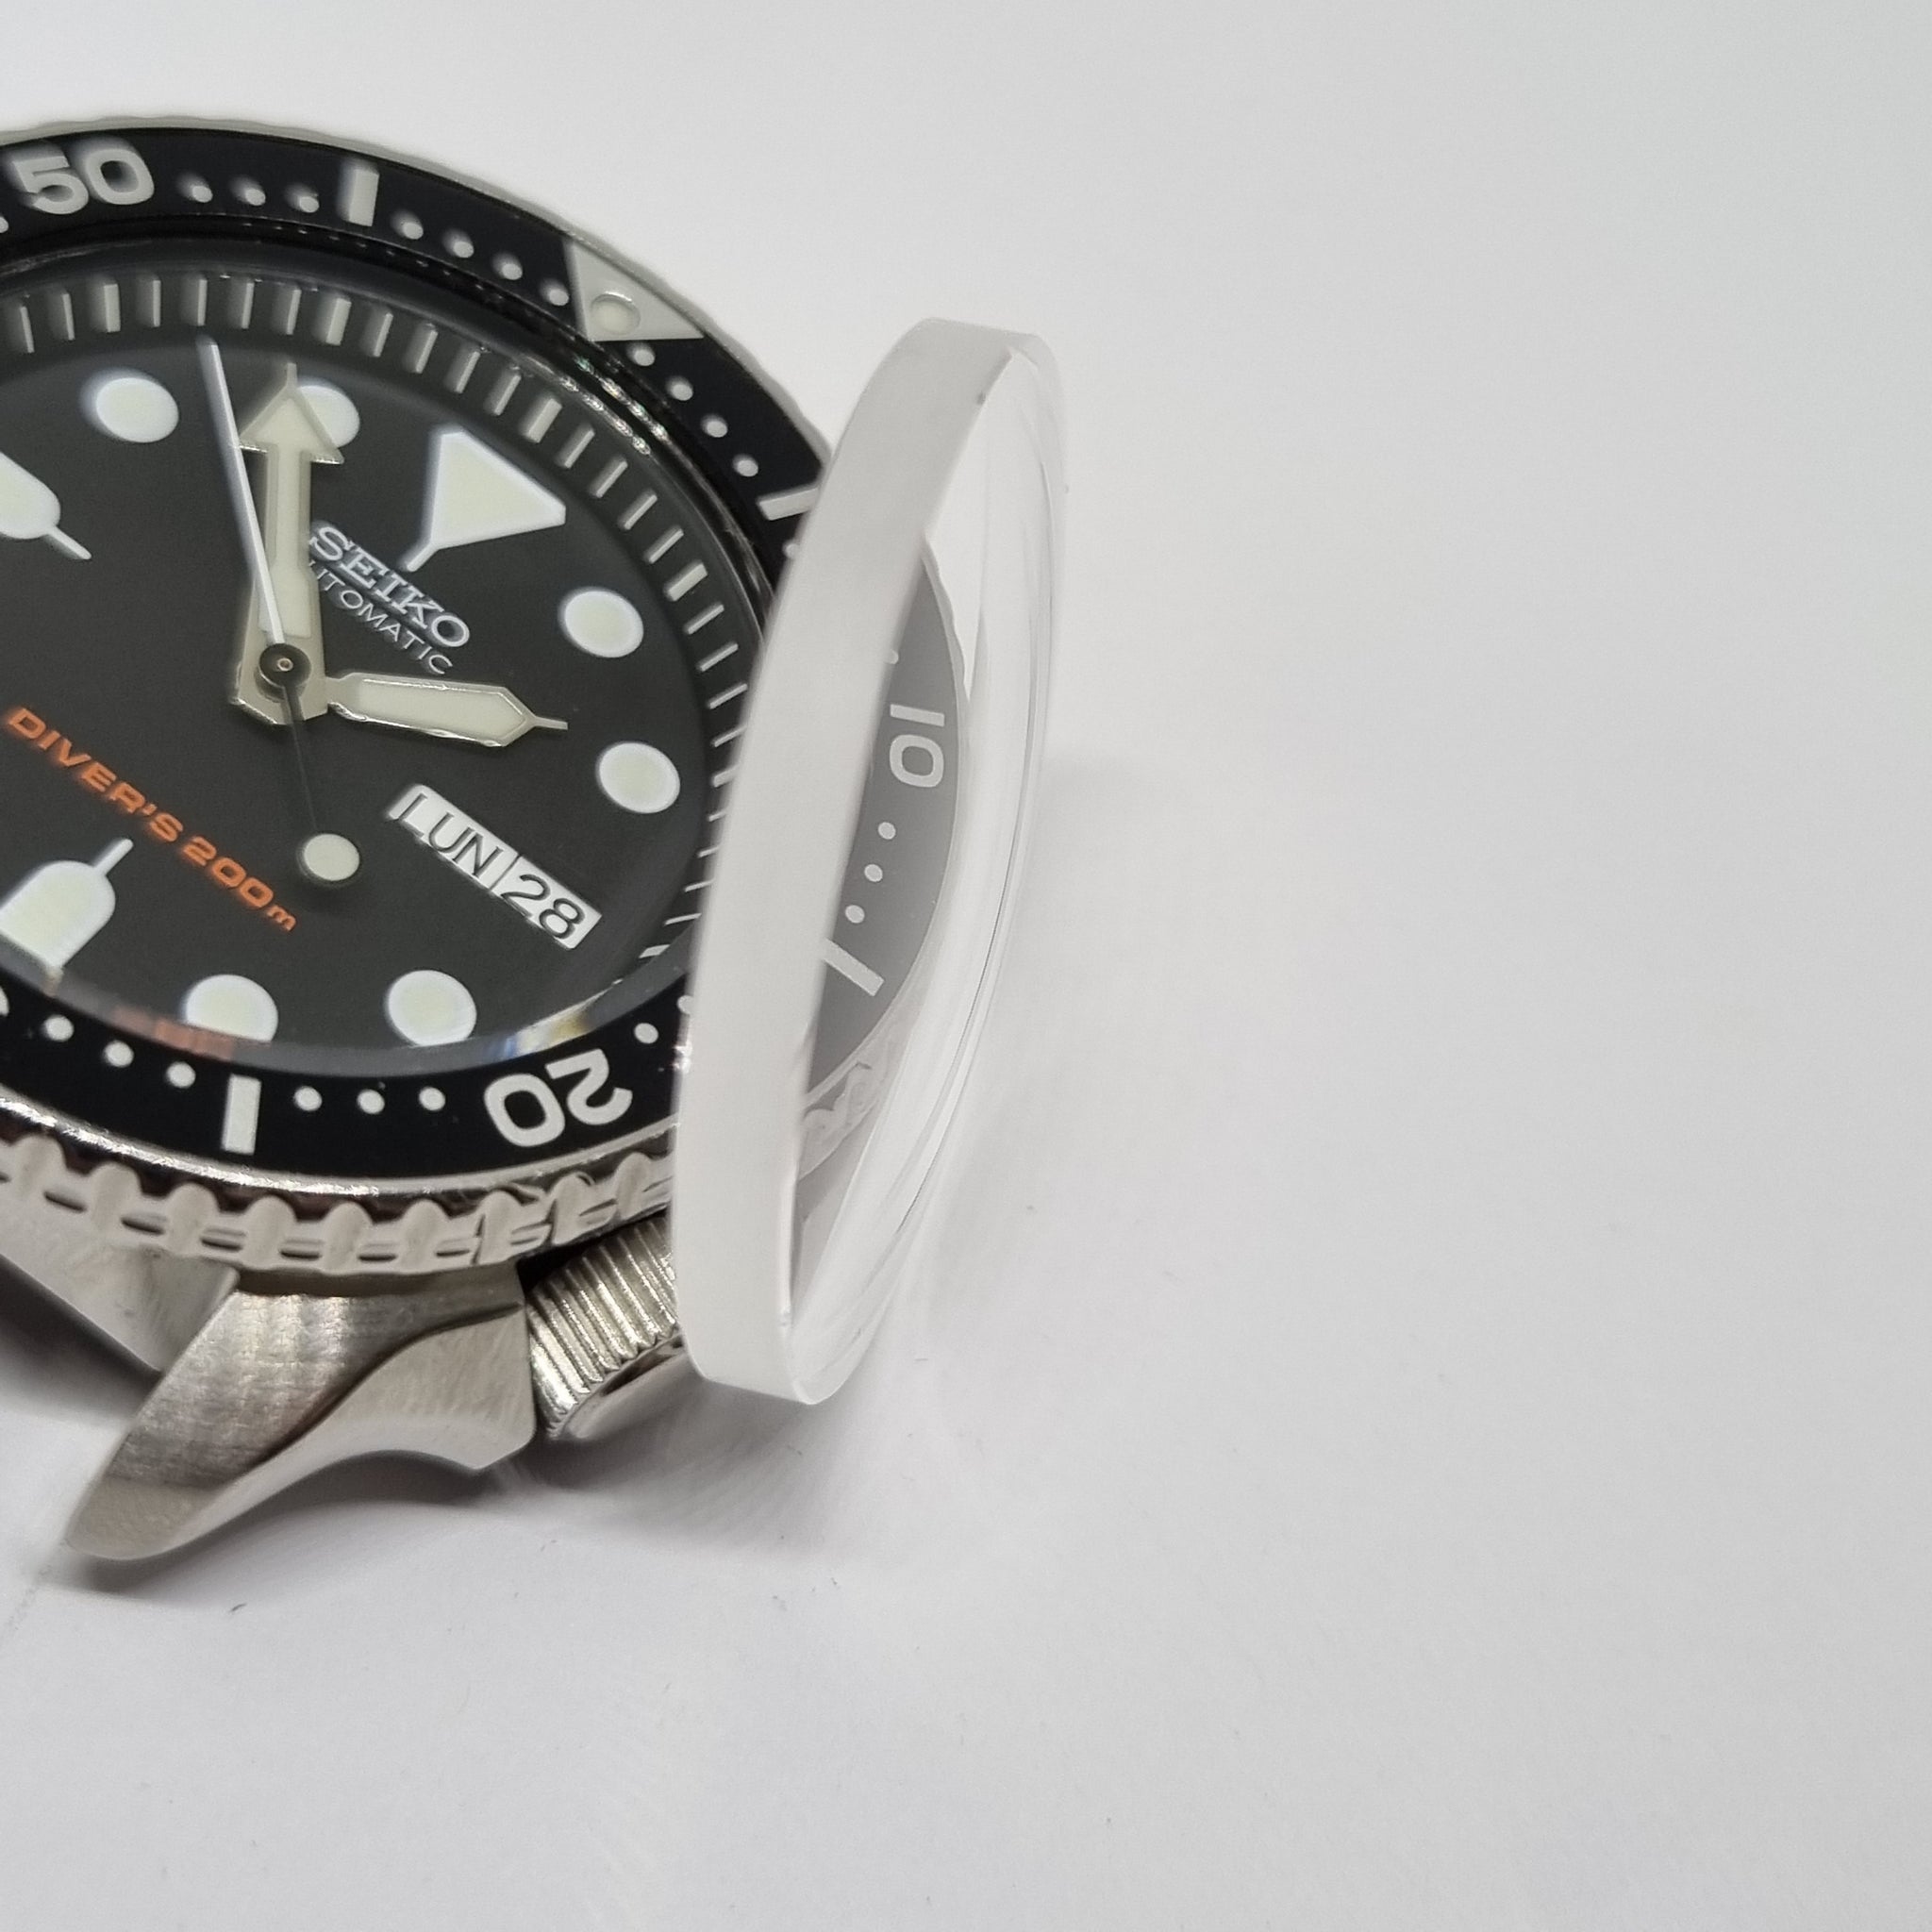 CRS004 Double Domed Sapphire Crystal for SKX007 / SRPD – Mod Mode Watches